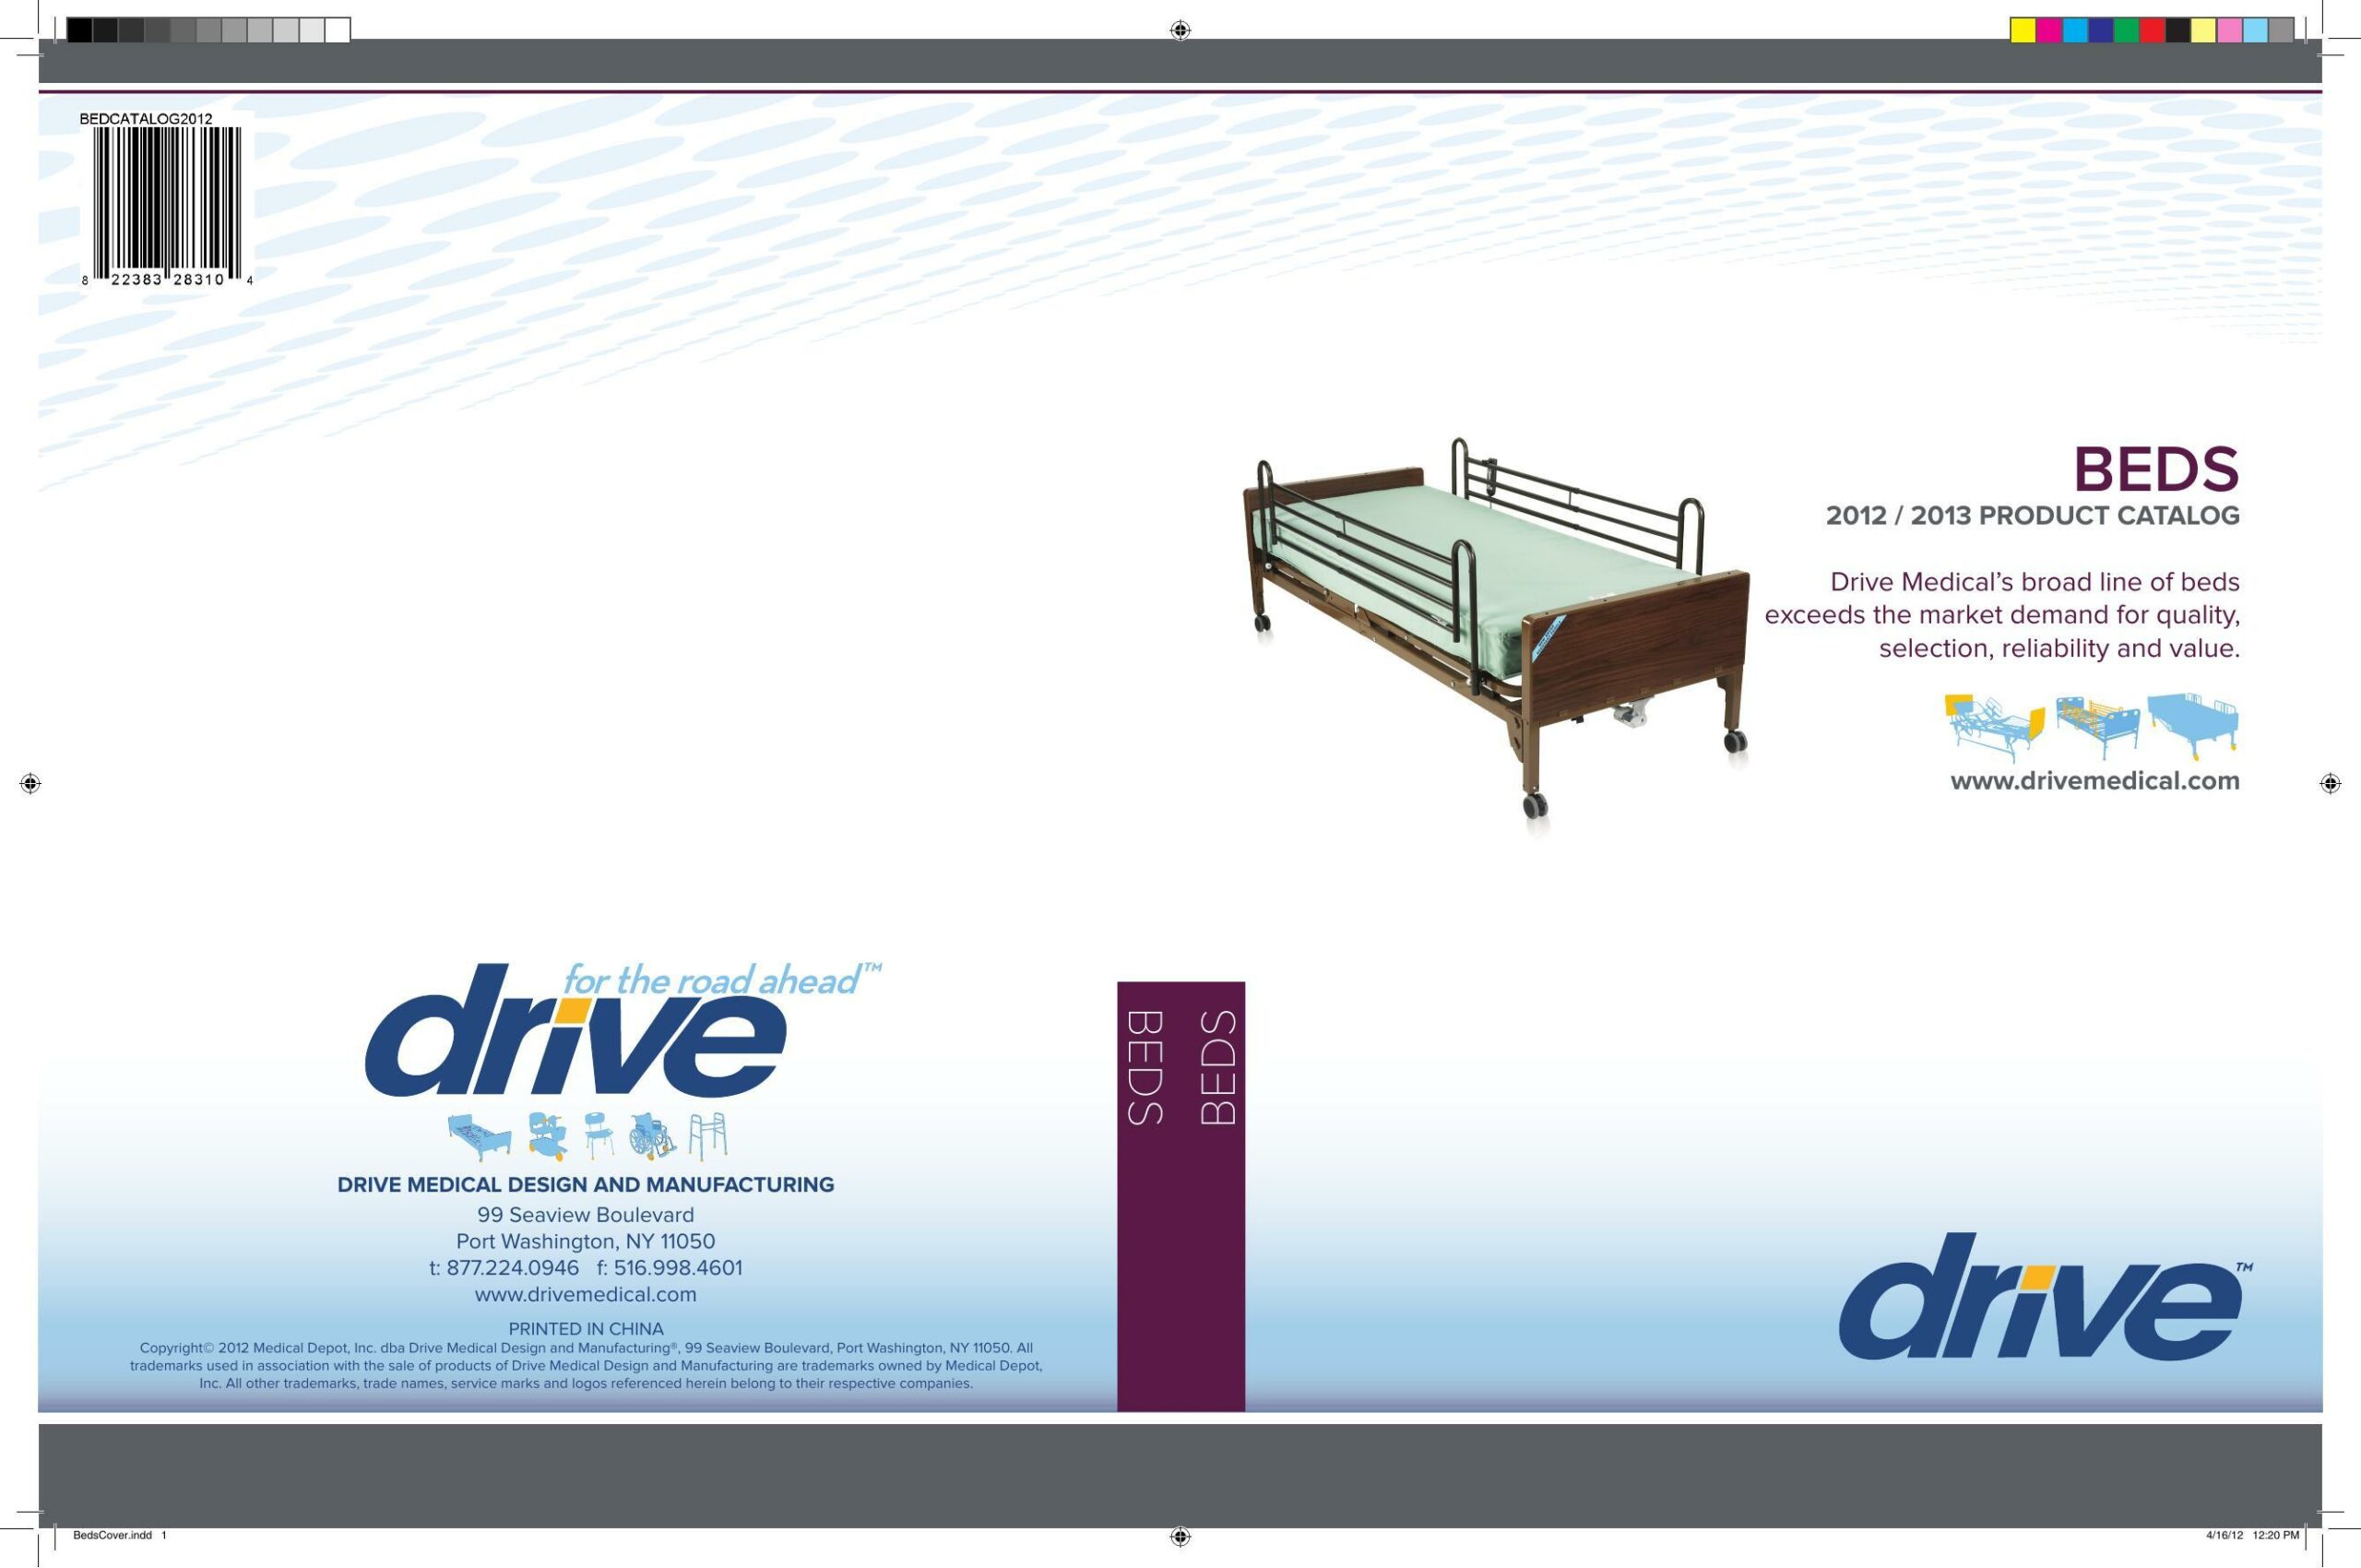 drive-medical-beds-2012-2013-product-catalog.pdf